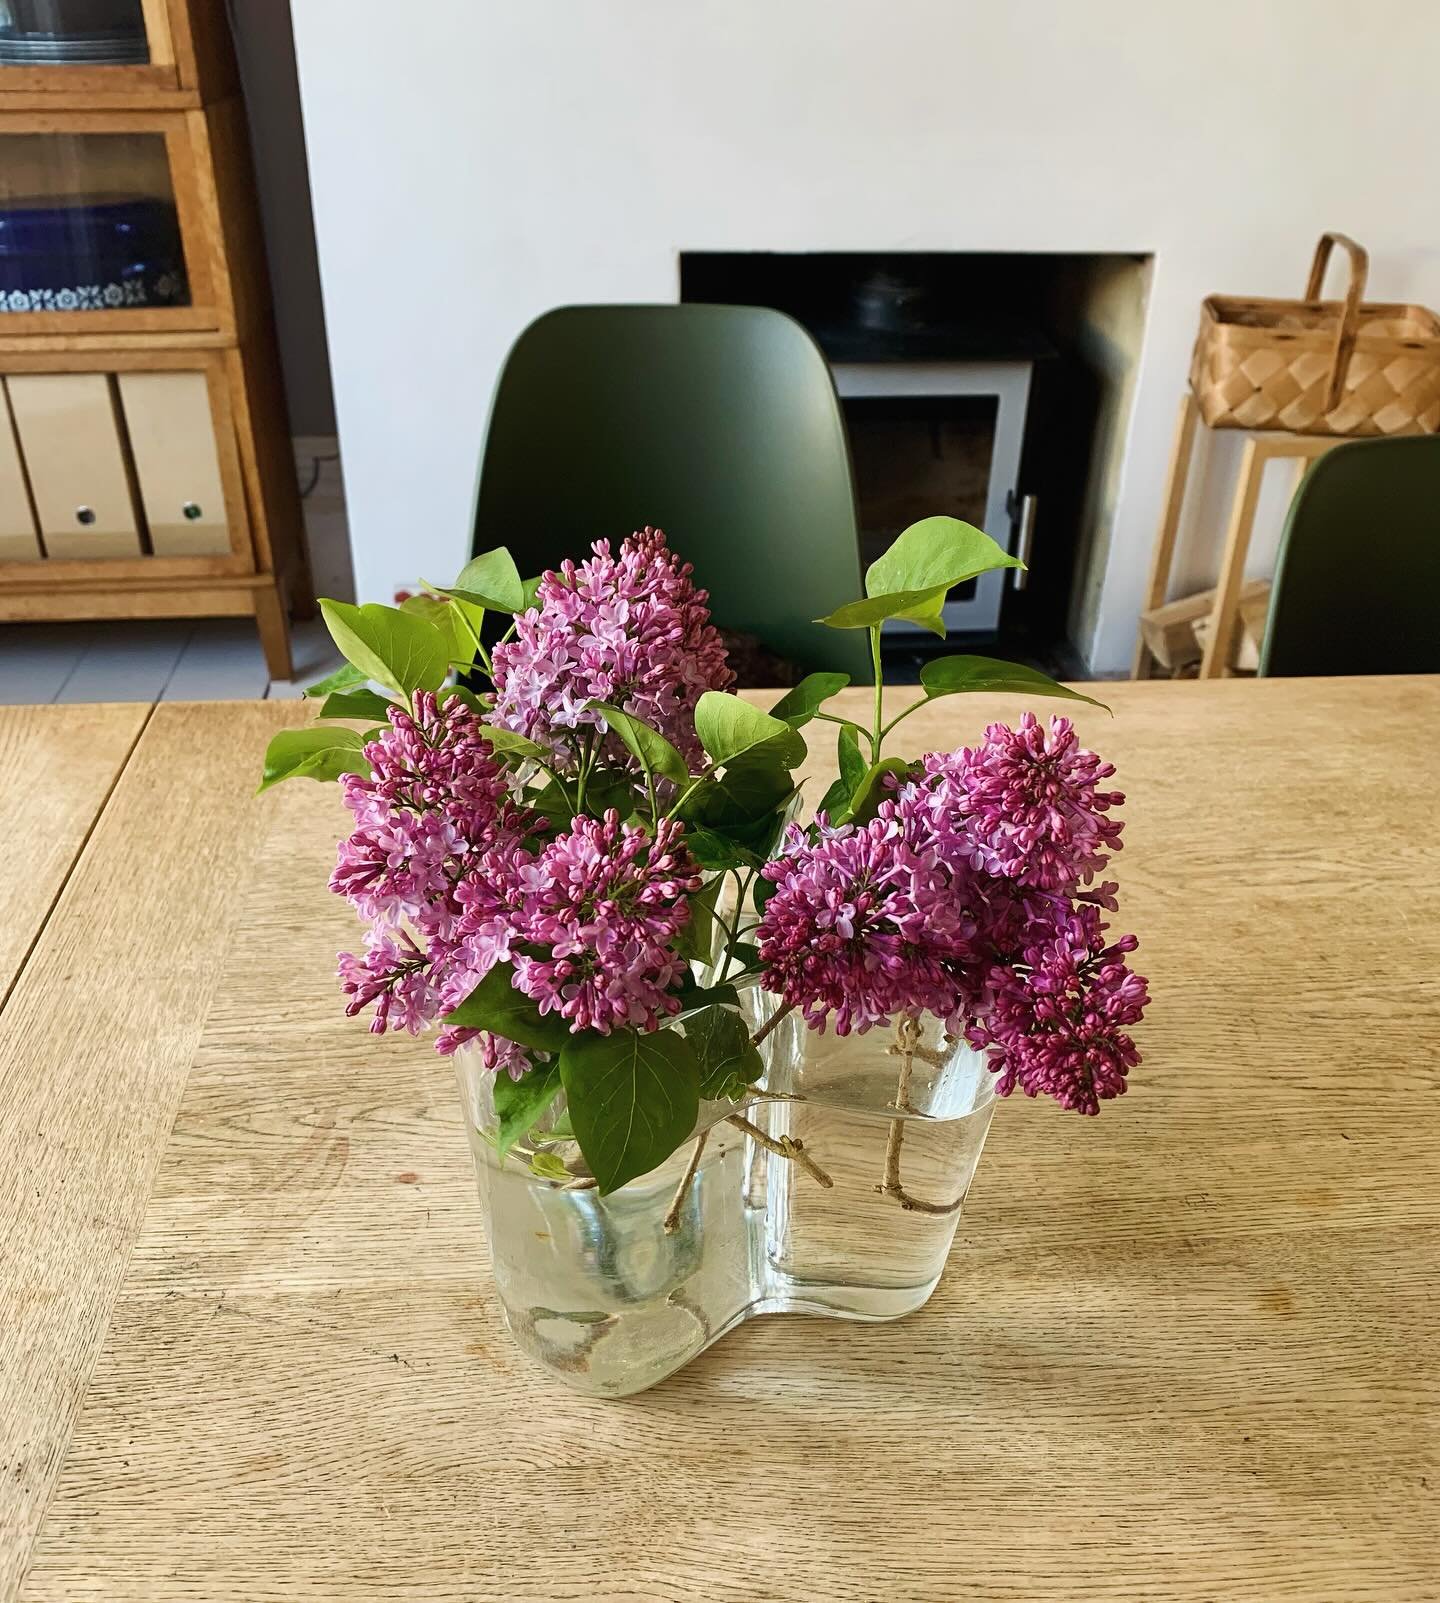 Spring &hellip;and along with it comes the annual pinching of the neighbours overhanging (honest it was) lilac! Perfect #alvaraalto vase too!

💜💜💜

#iittala #spring #lilac #flowers #purple #alvaraalto